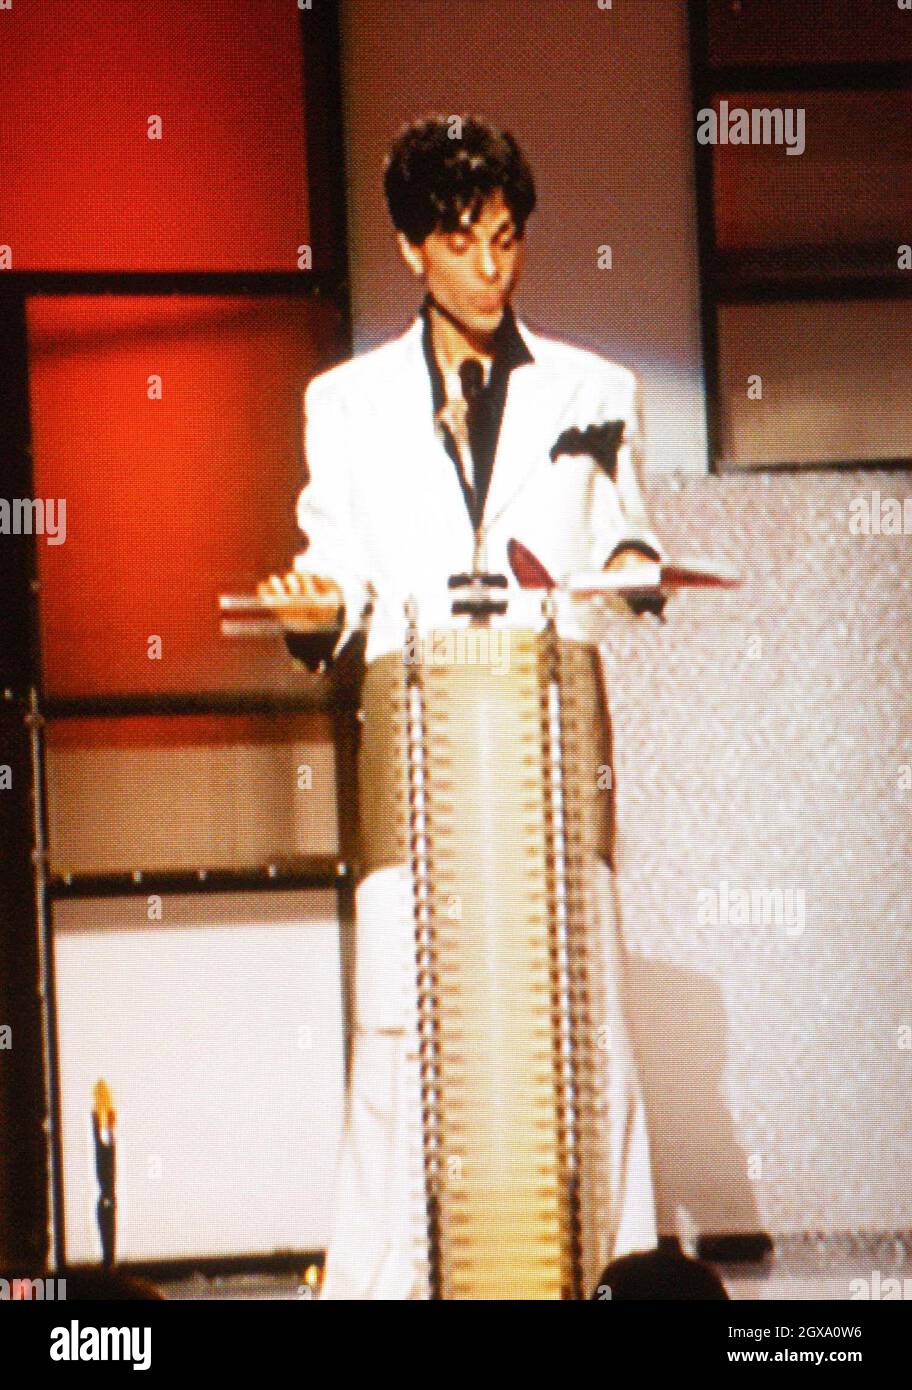 Prince from the Monitors accepting his awards at the 19th Annual Rock and Roll Hall of Fame Induction Ceremony at Waldorf Astoria, New York.  Gene Shaw/allactiondigital.com  Stock Photo